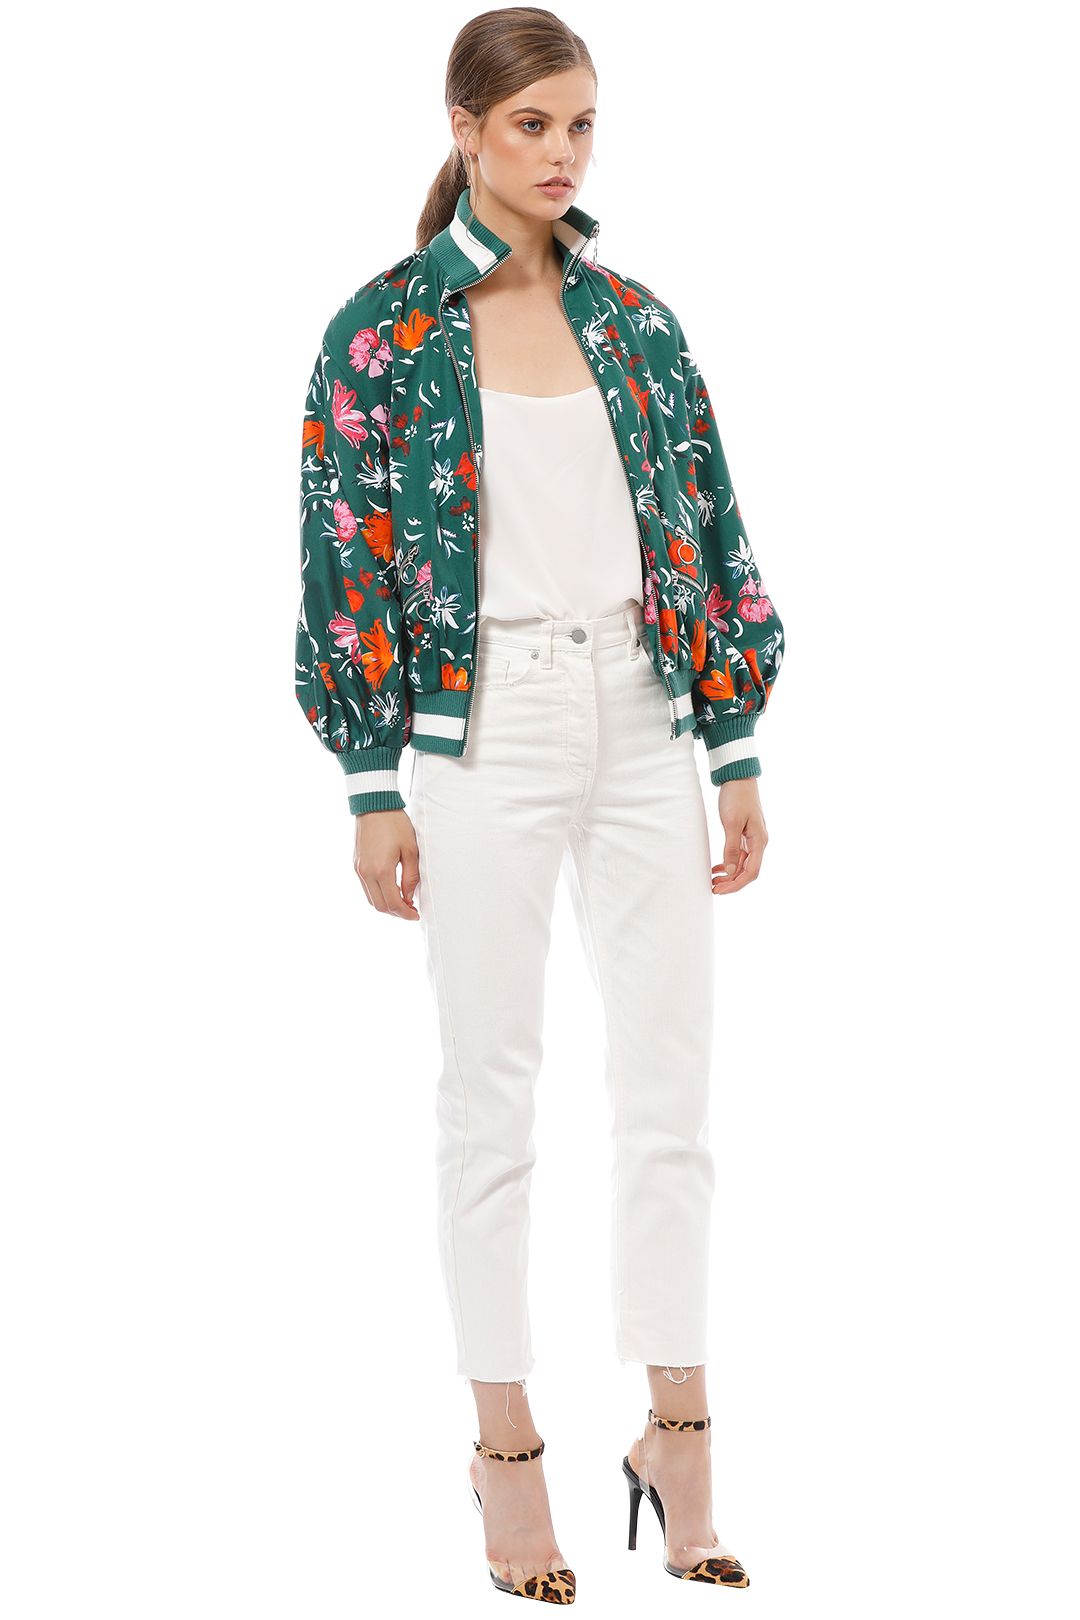 CMEO Collective - Elation Bomber - Green Floral - Side